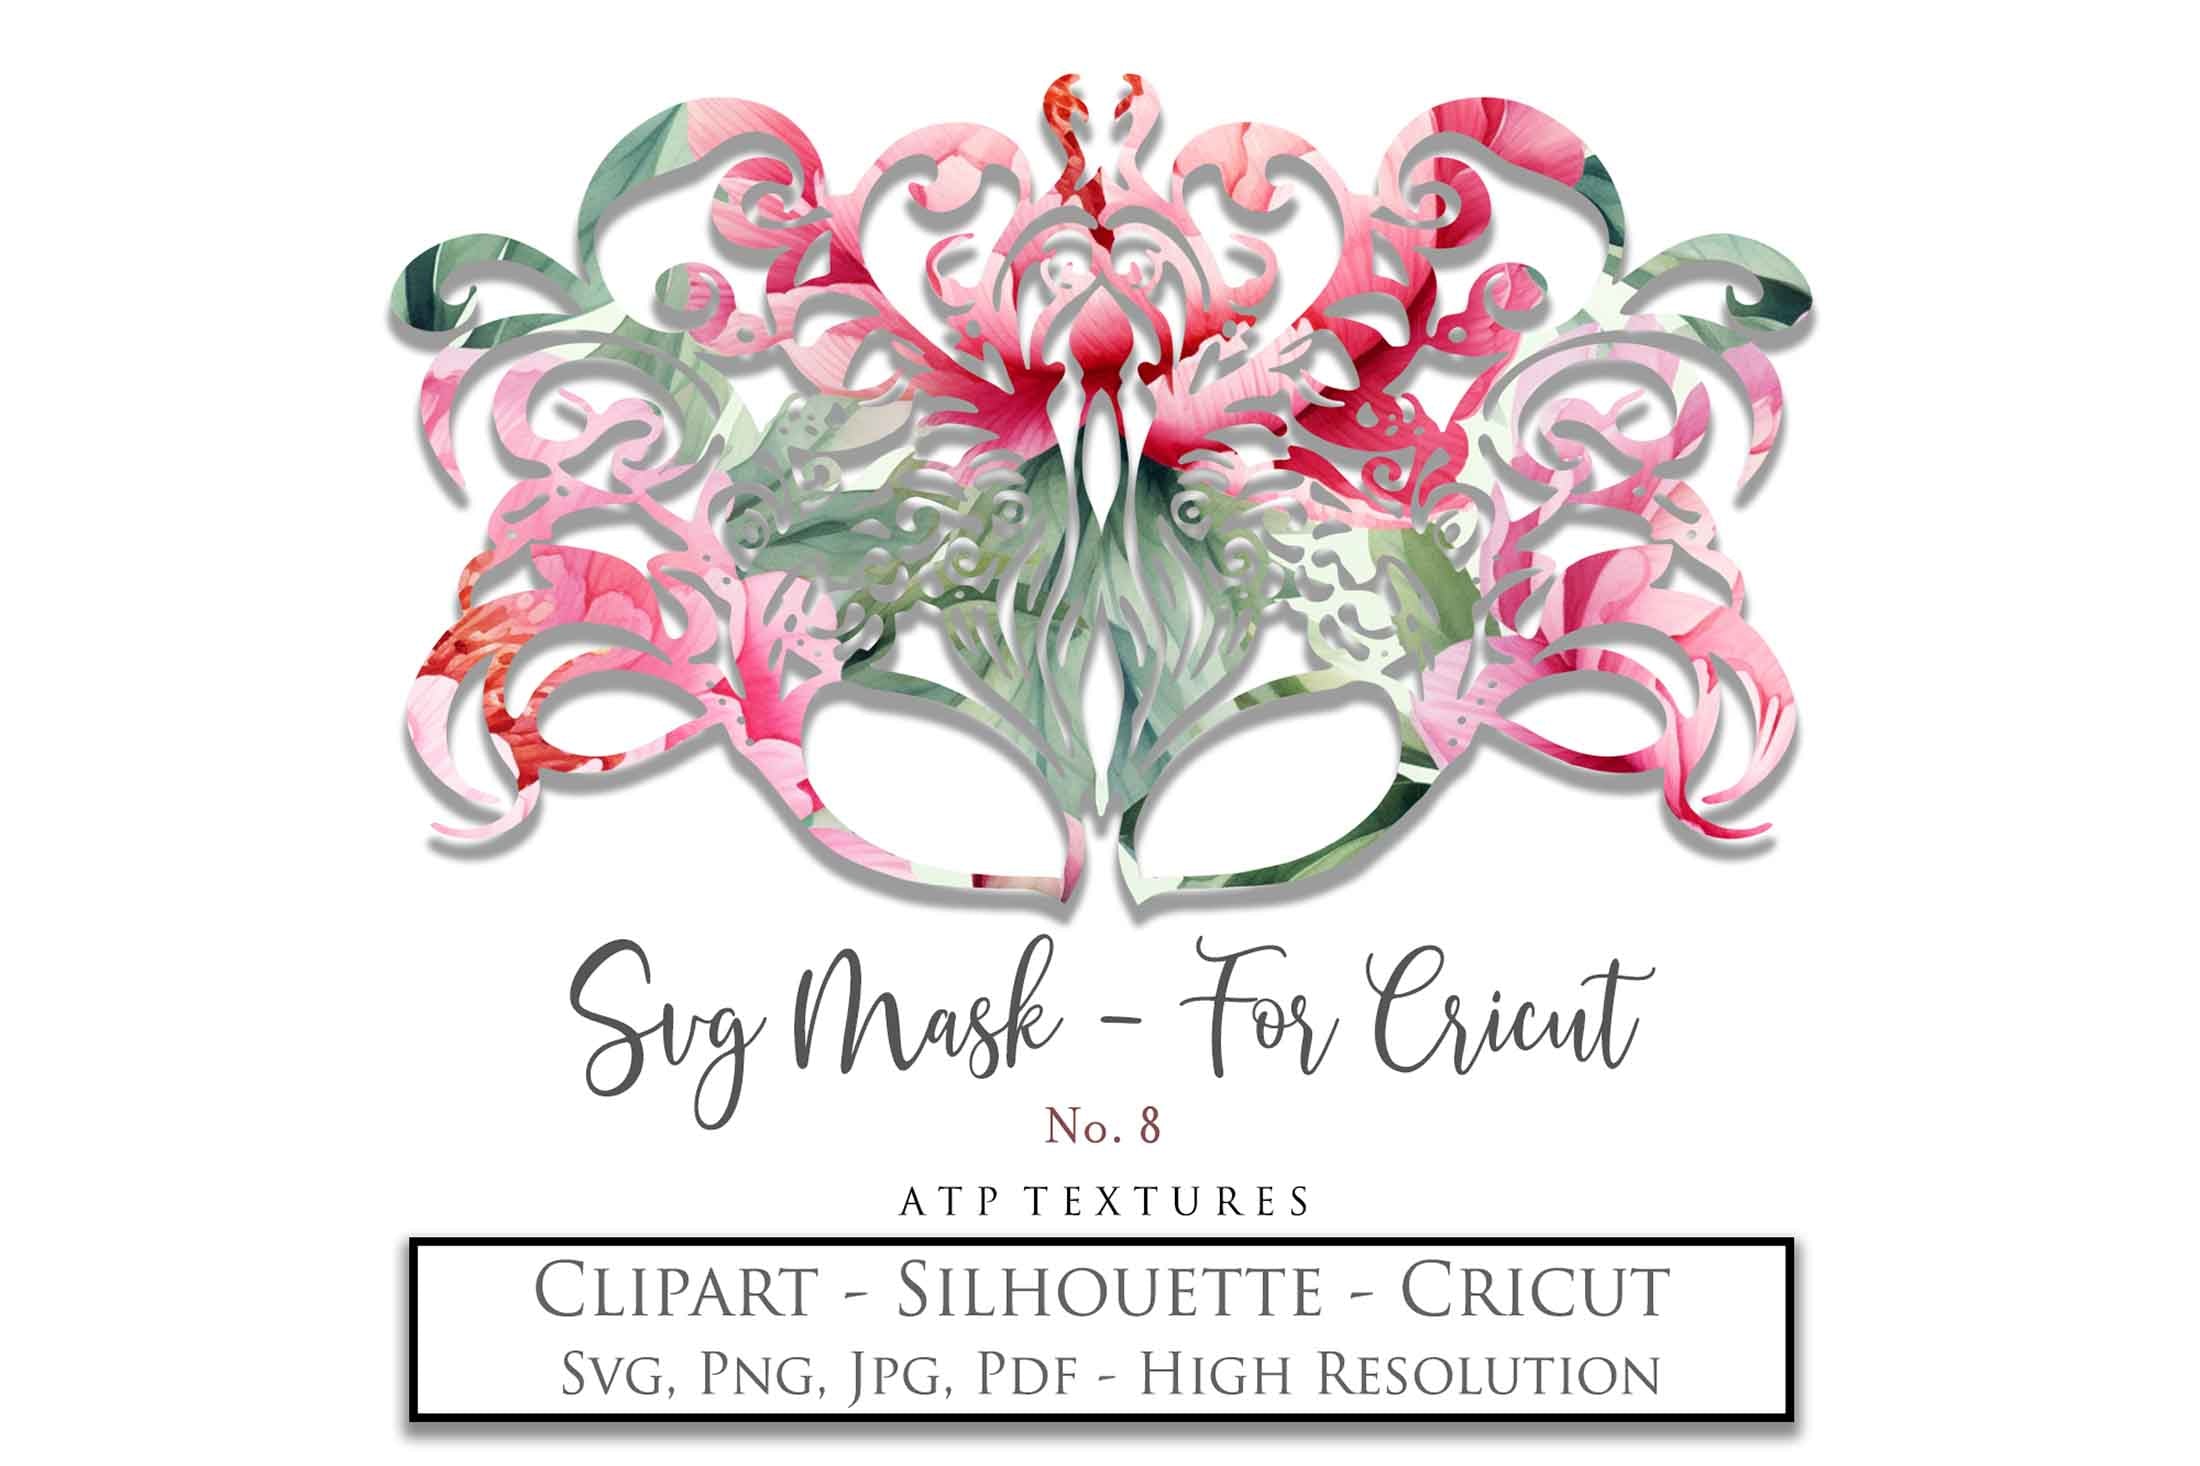 SVG Masquerade Mask Clipart For Cricut , Silhouette or any other cutting machine that accepts the files provided in this set. Clipart for your next art project or even for print! SVG, PNG, PDF, JPG. This clipart is In high resolution.